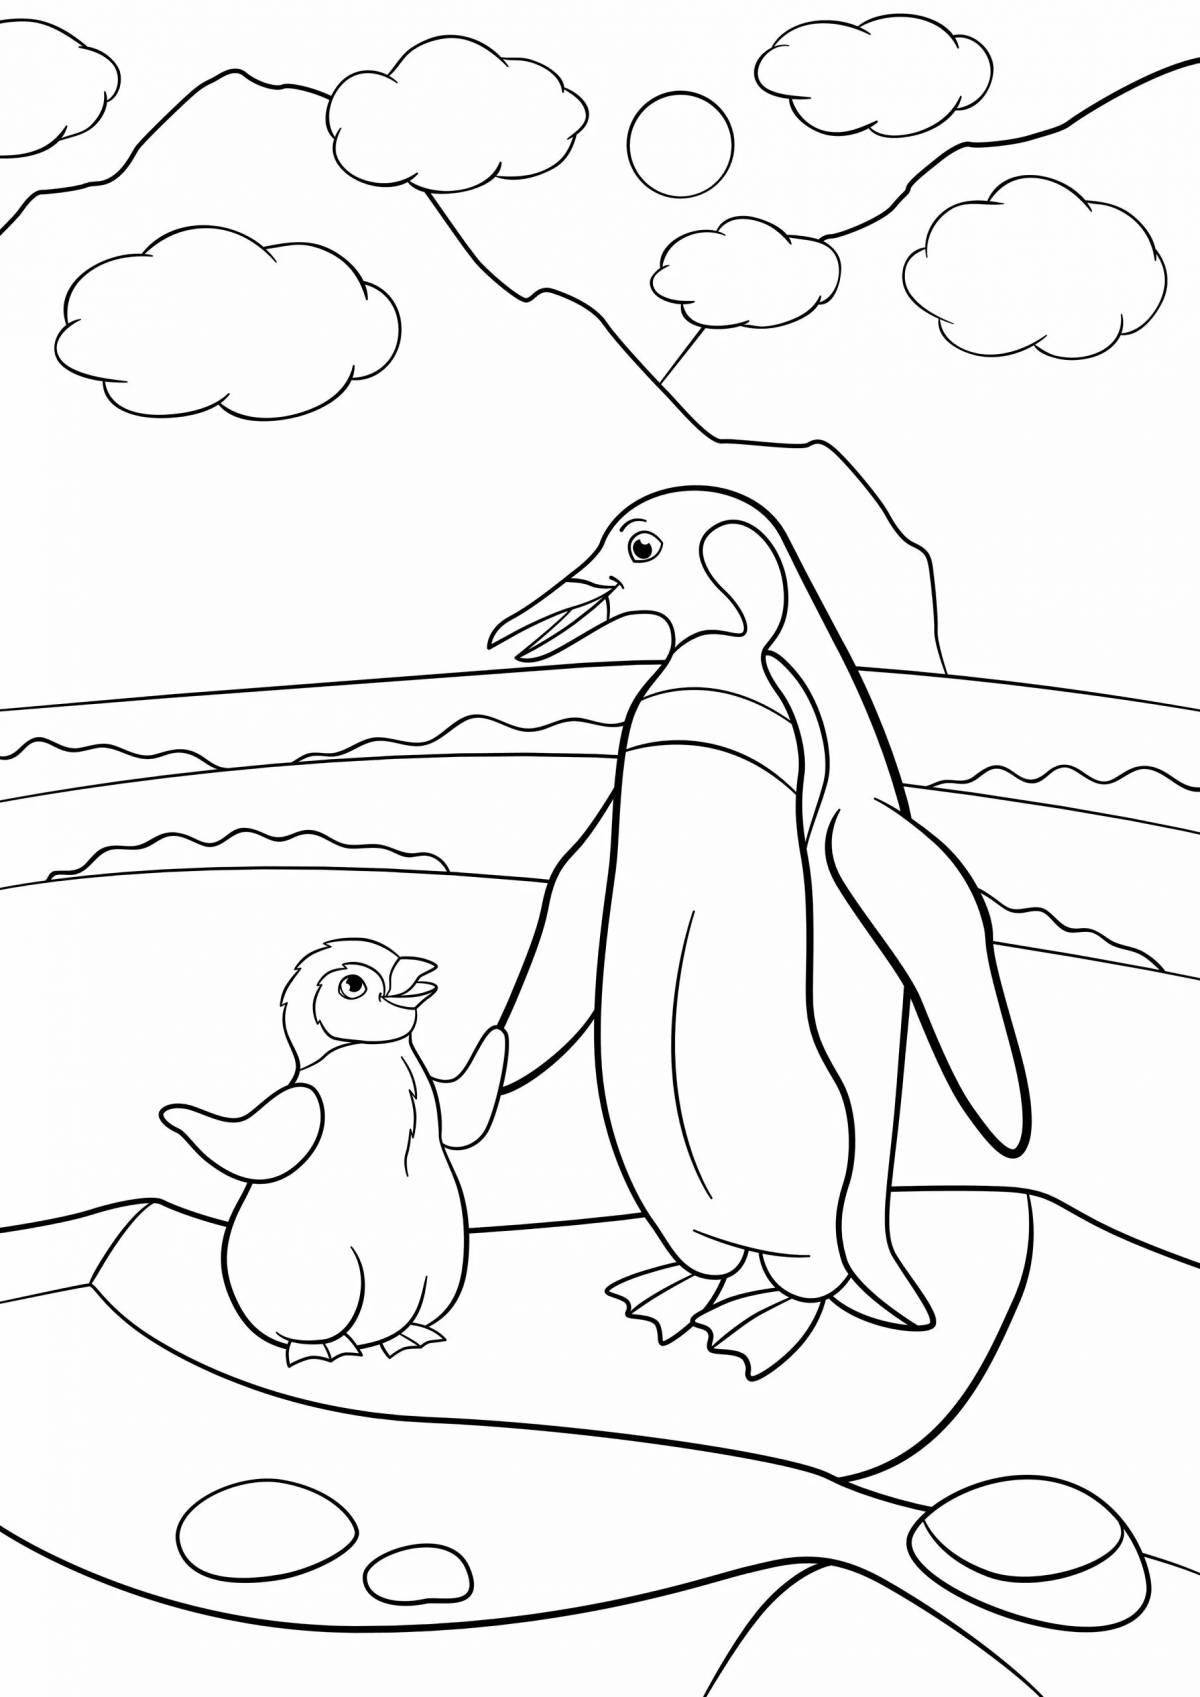 Great coloring book of antarctica for kids 6-7 years old